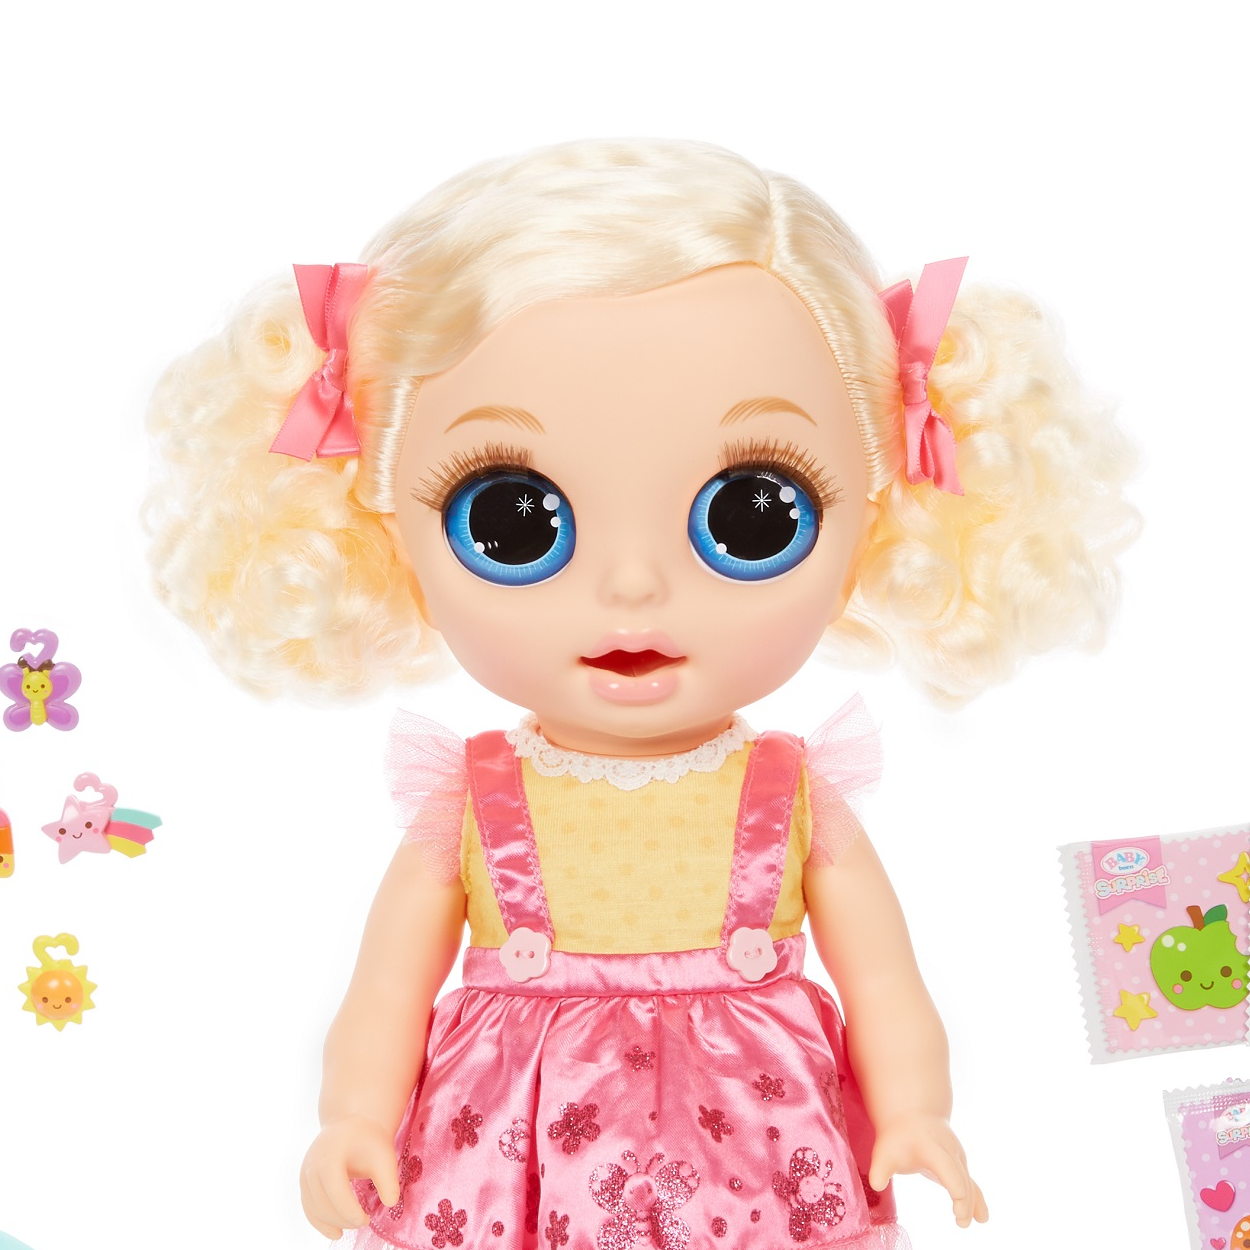 Baby Born Surprise Magic Potty Surprise Blue Eyes – Doll Pees Glitter & Poops Surprise Charms Doll Playset - image 7 of 8